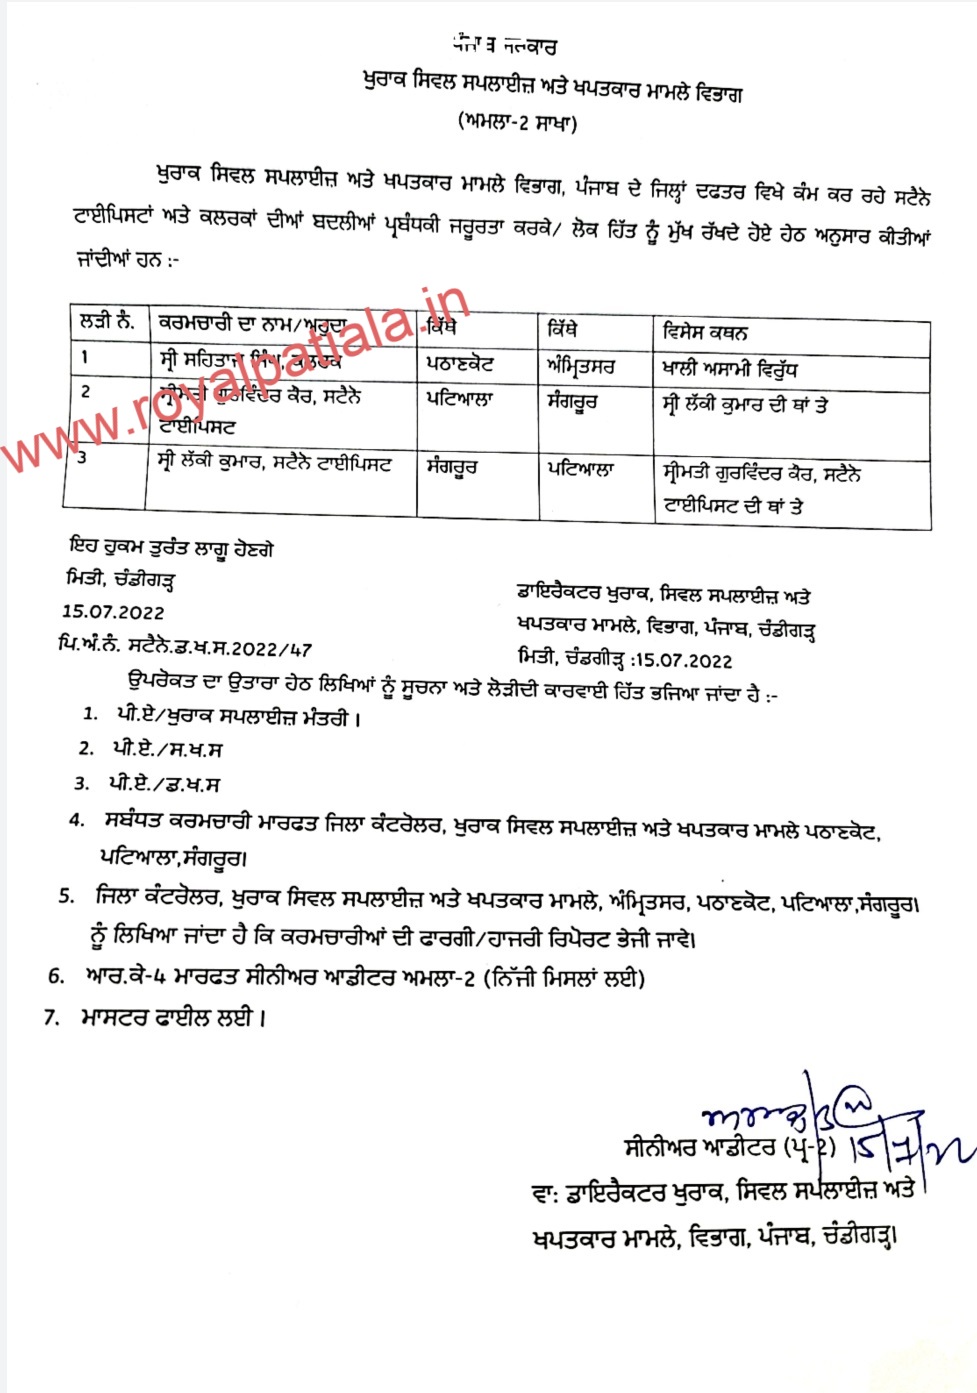 Transfers-food and civil supply department officers transferred 